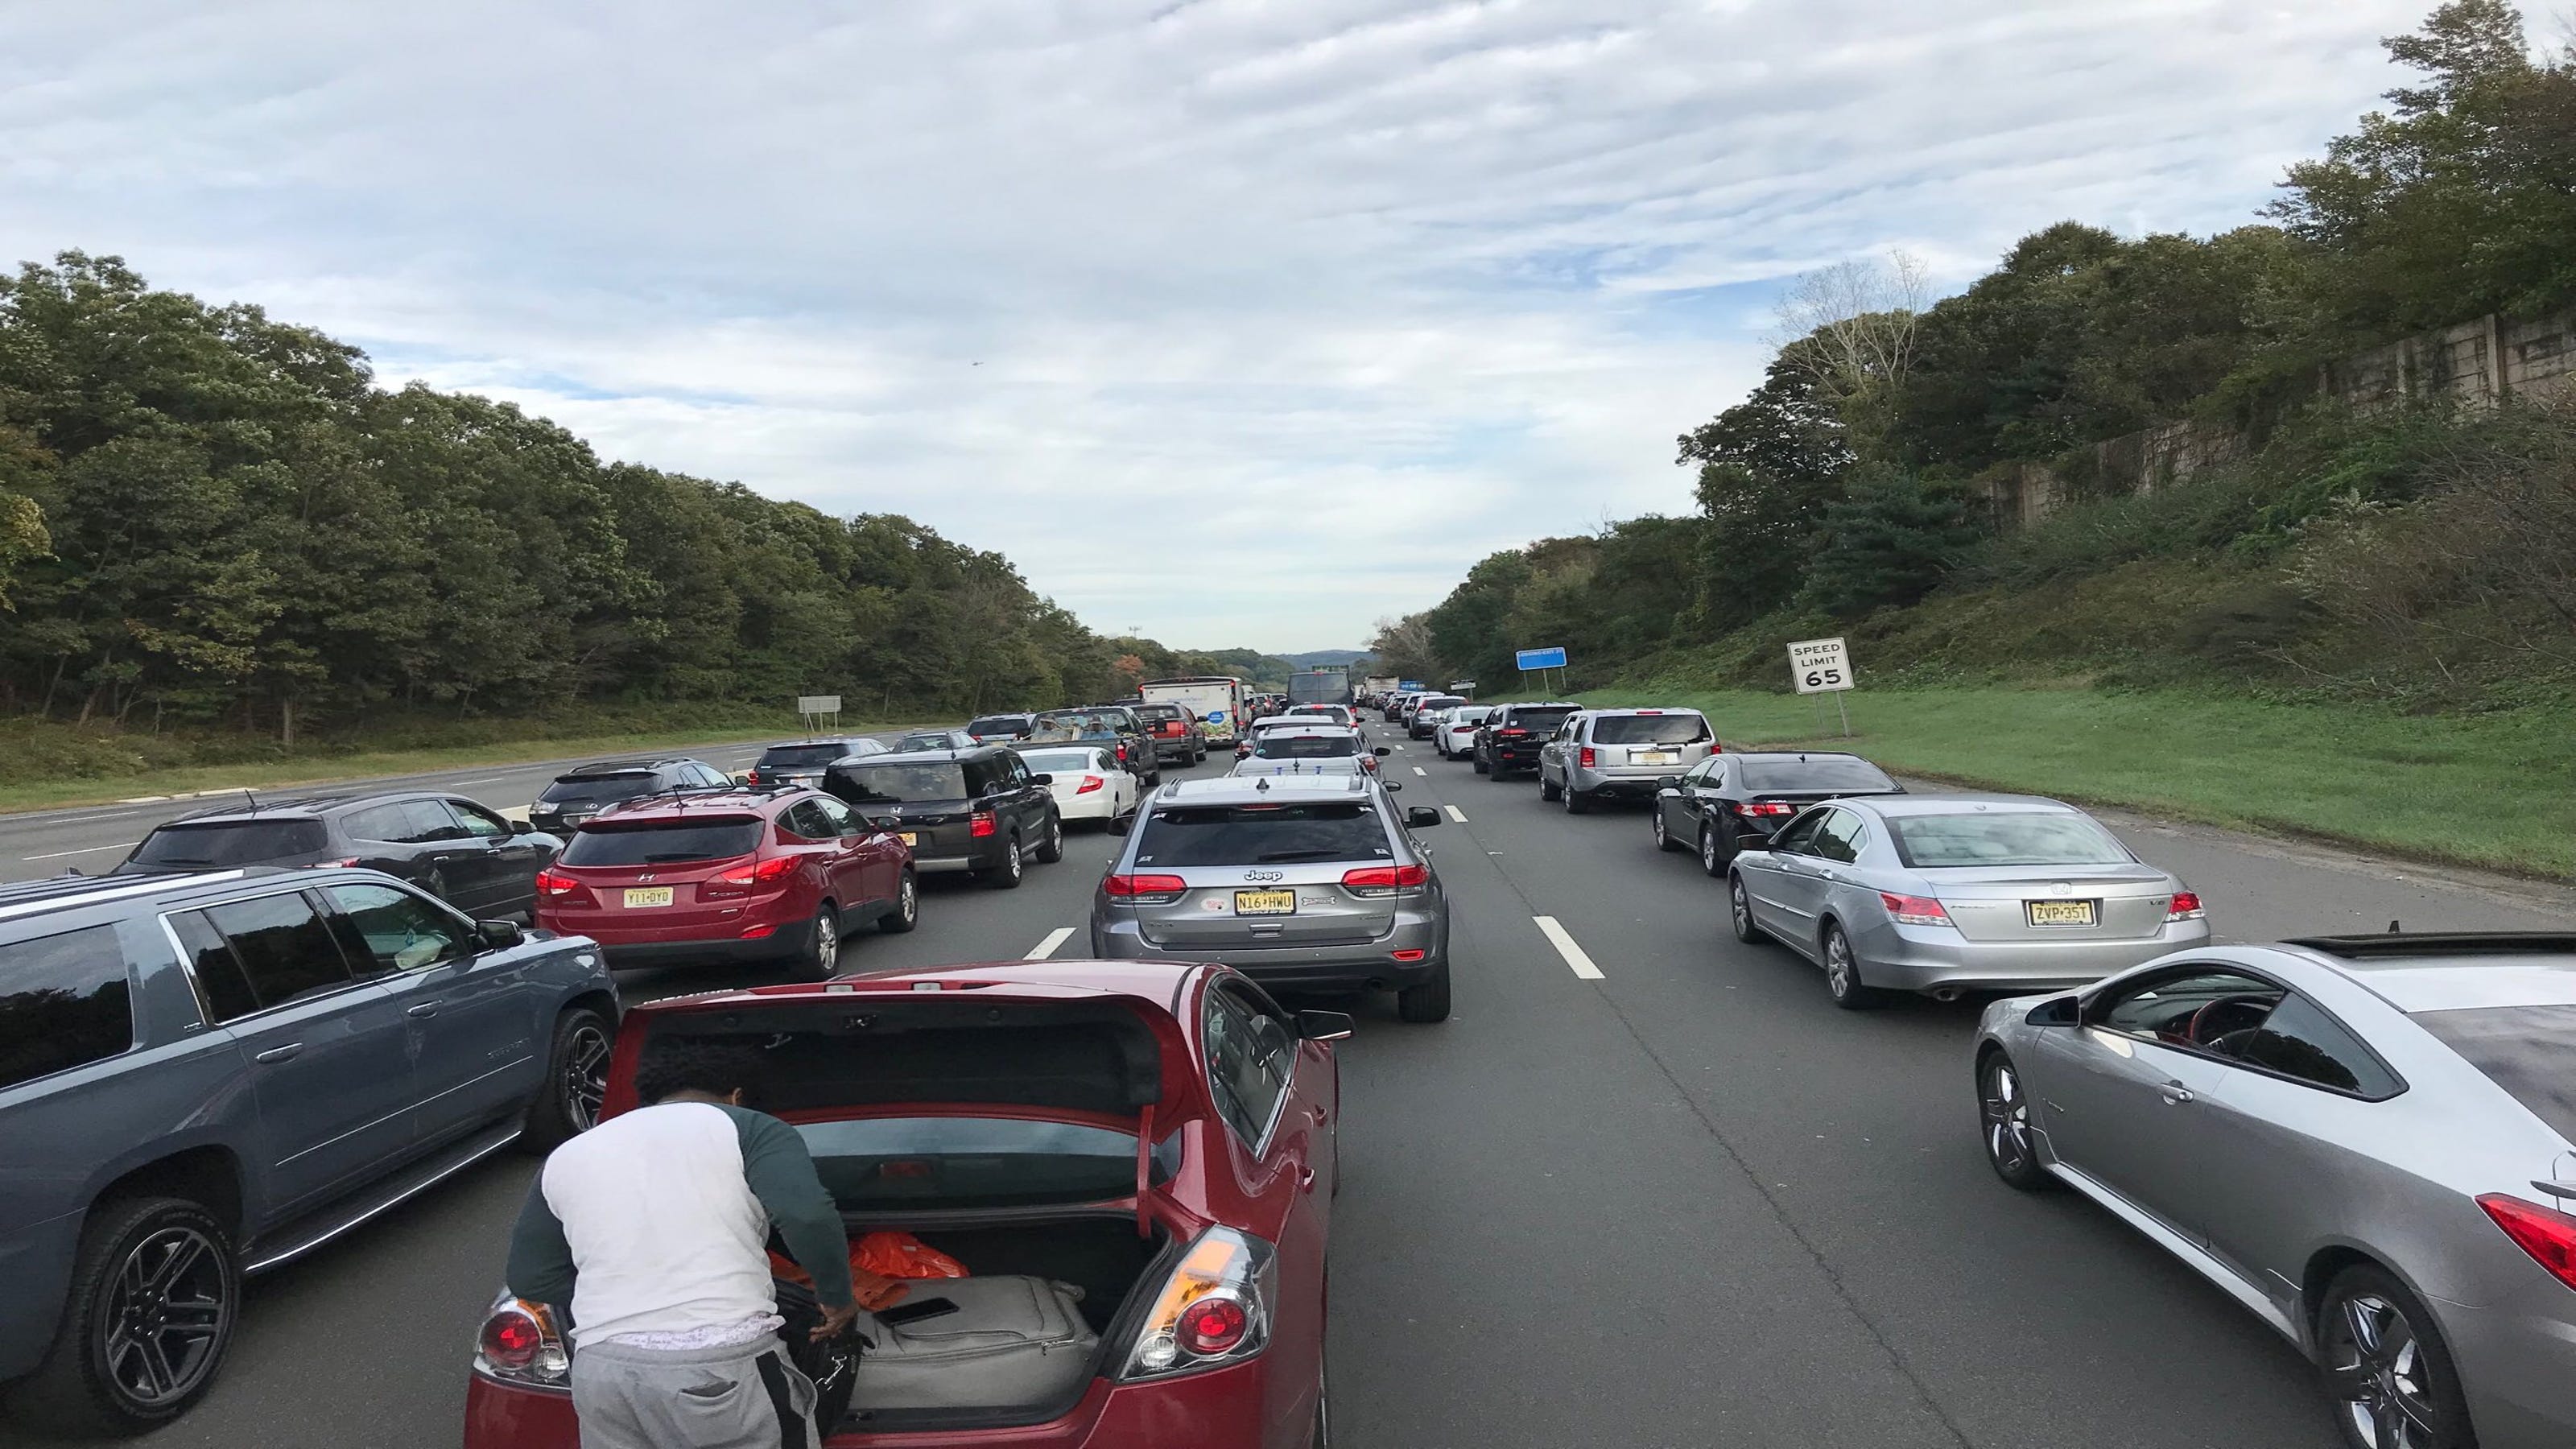 Route 80 East in Rockaway NJ in gridlock after serious accident